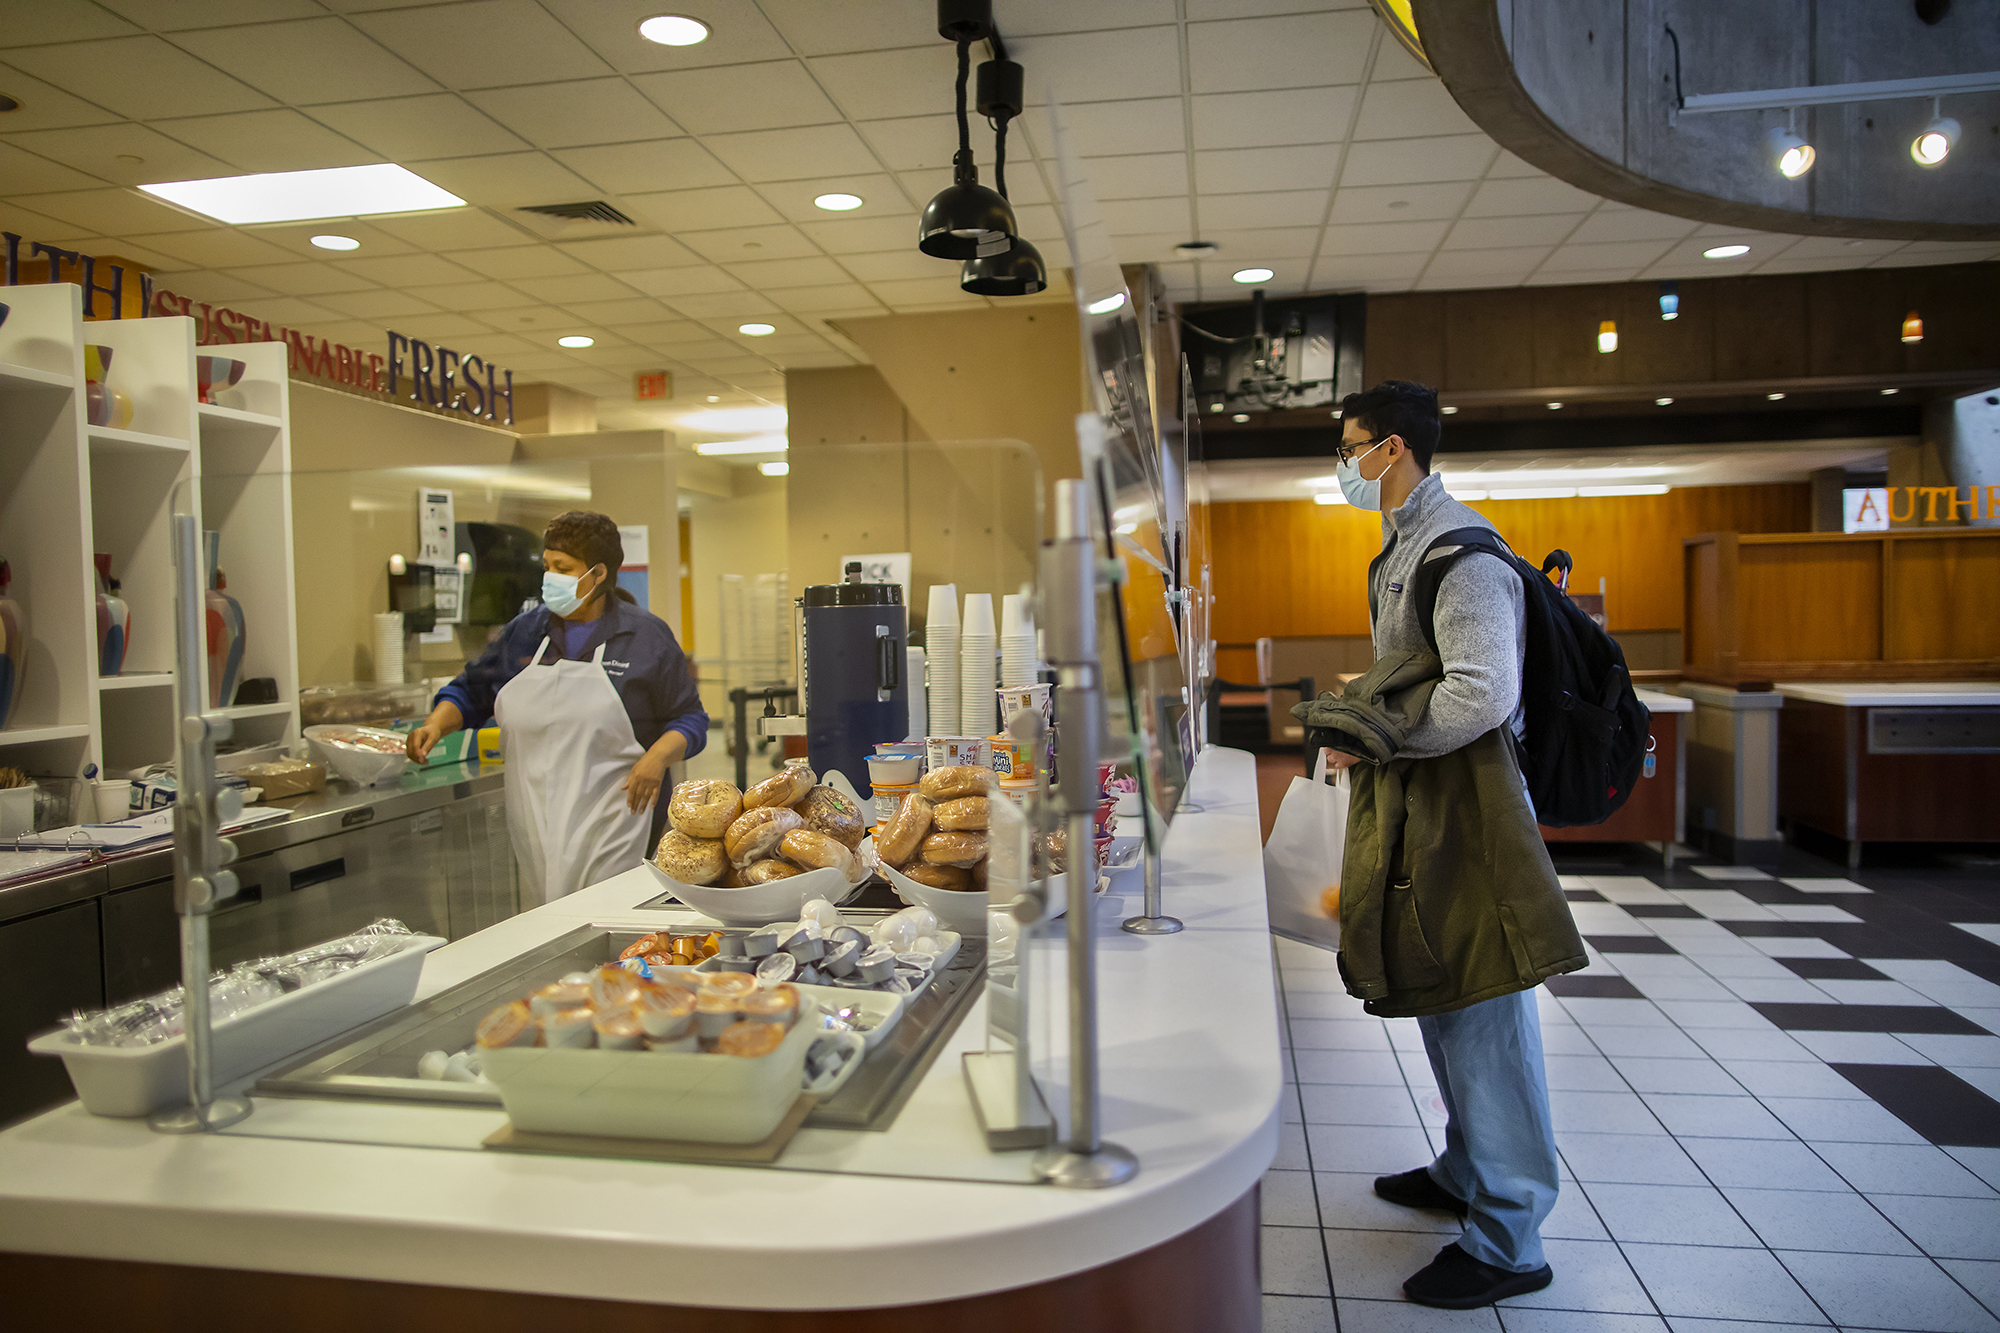 A student wearing a mask orders food from a food service worker wearing a mask at a Penn Dining location.